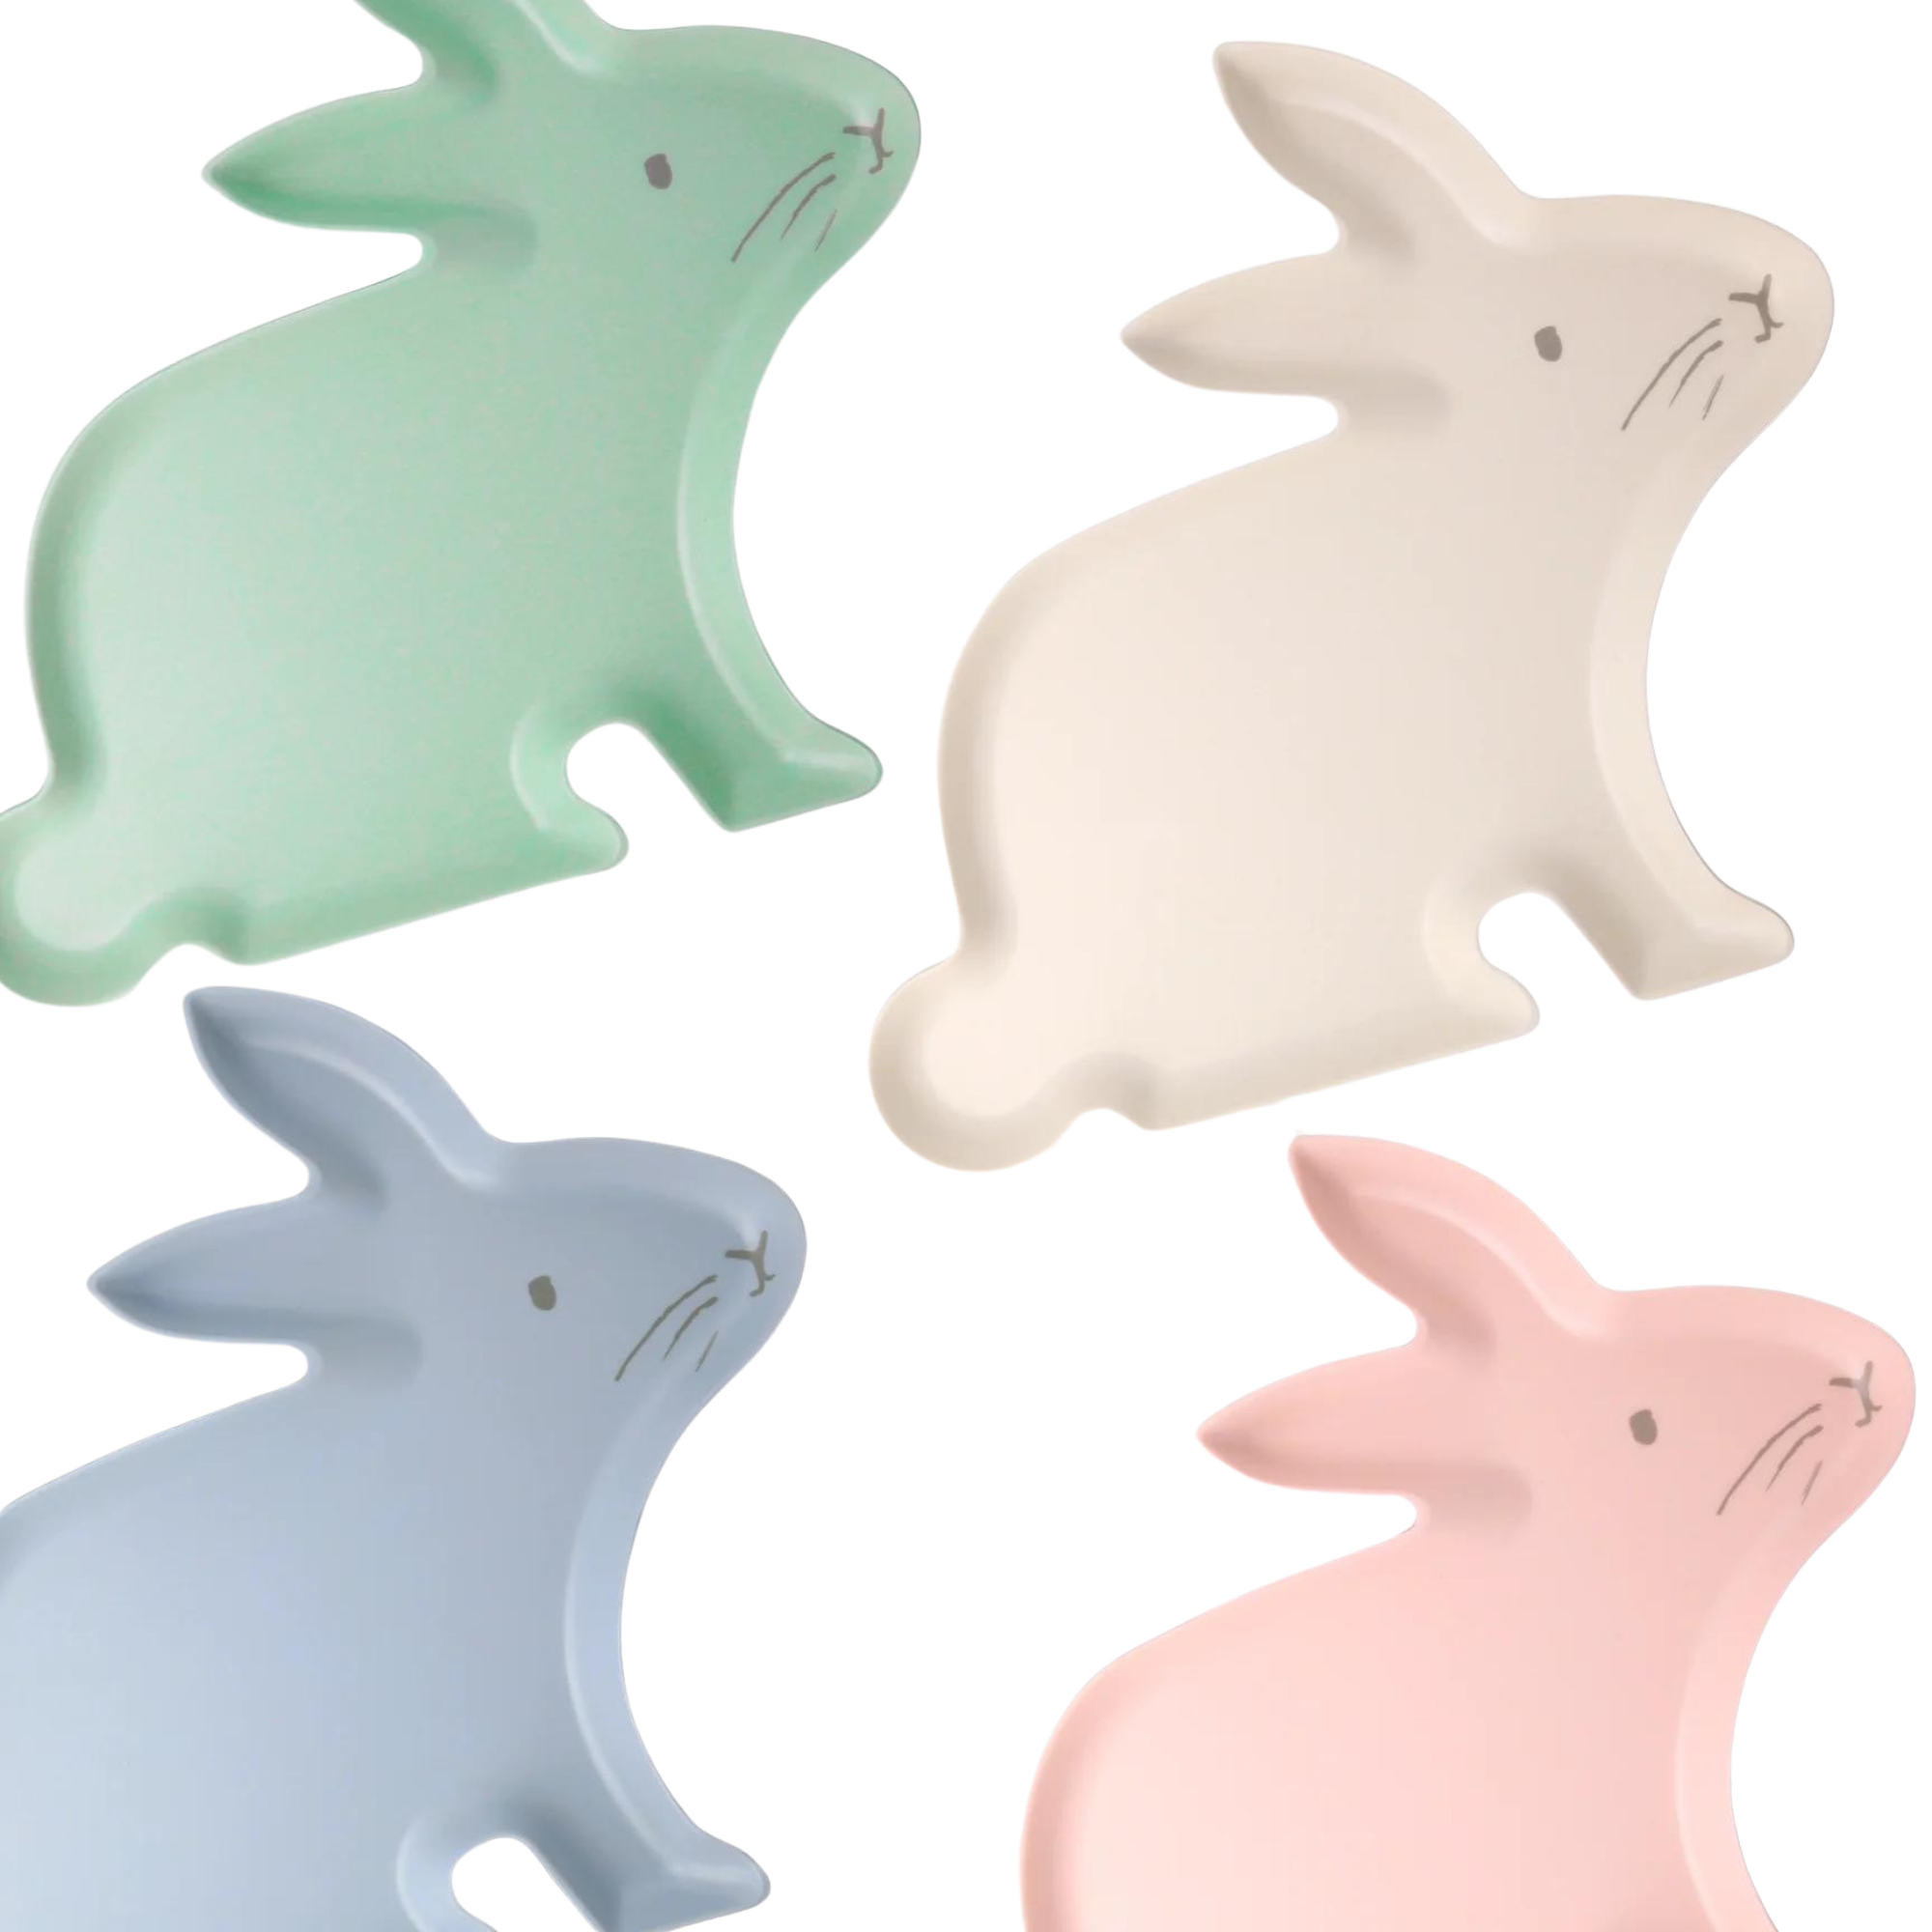 Pastel Bunny Bamboo Lunch Plates 4ct | The Party Darling